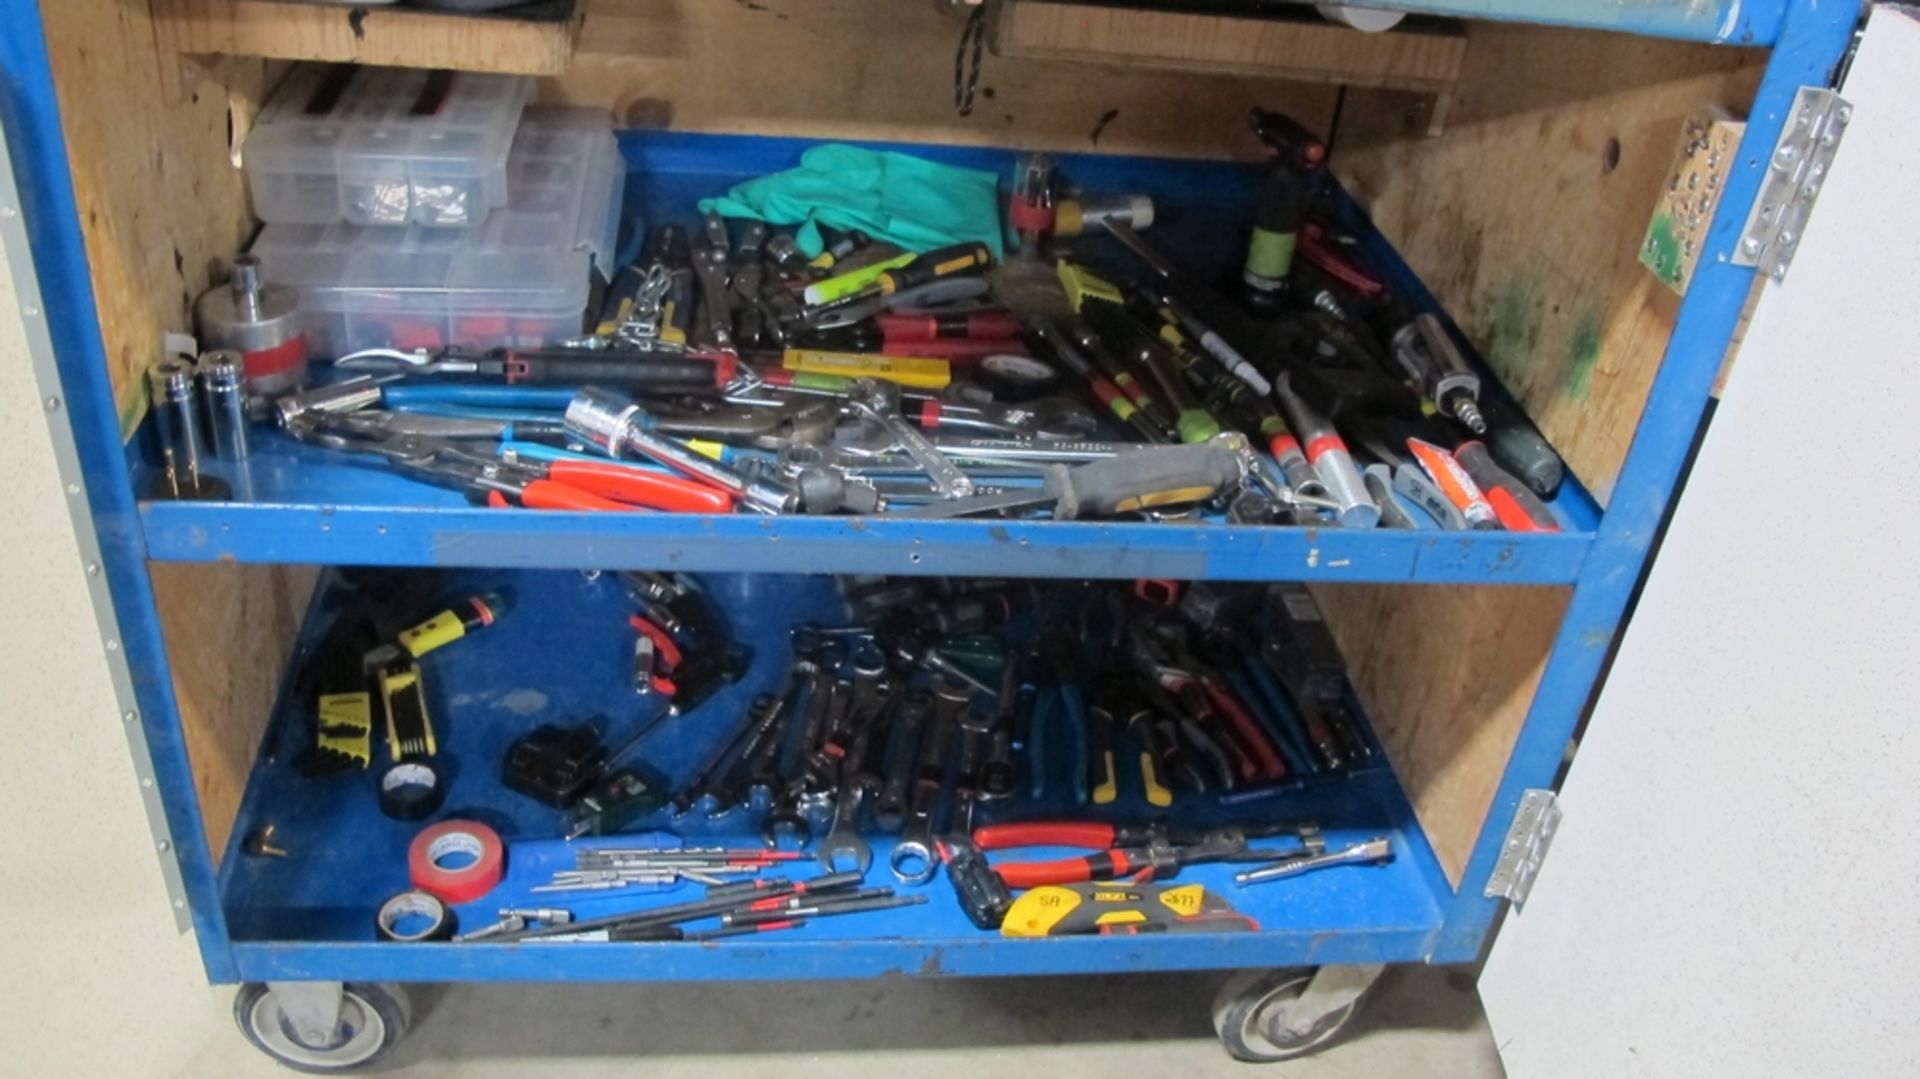 LOT OF 1 ROCK RIVER TOOL BOX, 6 DRAWERS W/SHOP CART AND TOOLS (100 SHIRLEY AVE KITCHENER) - Image 7 of 7